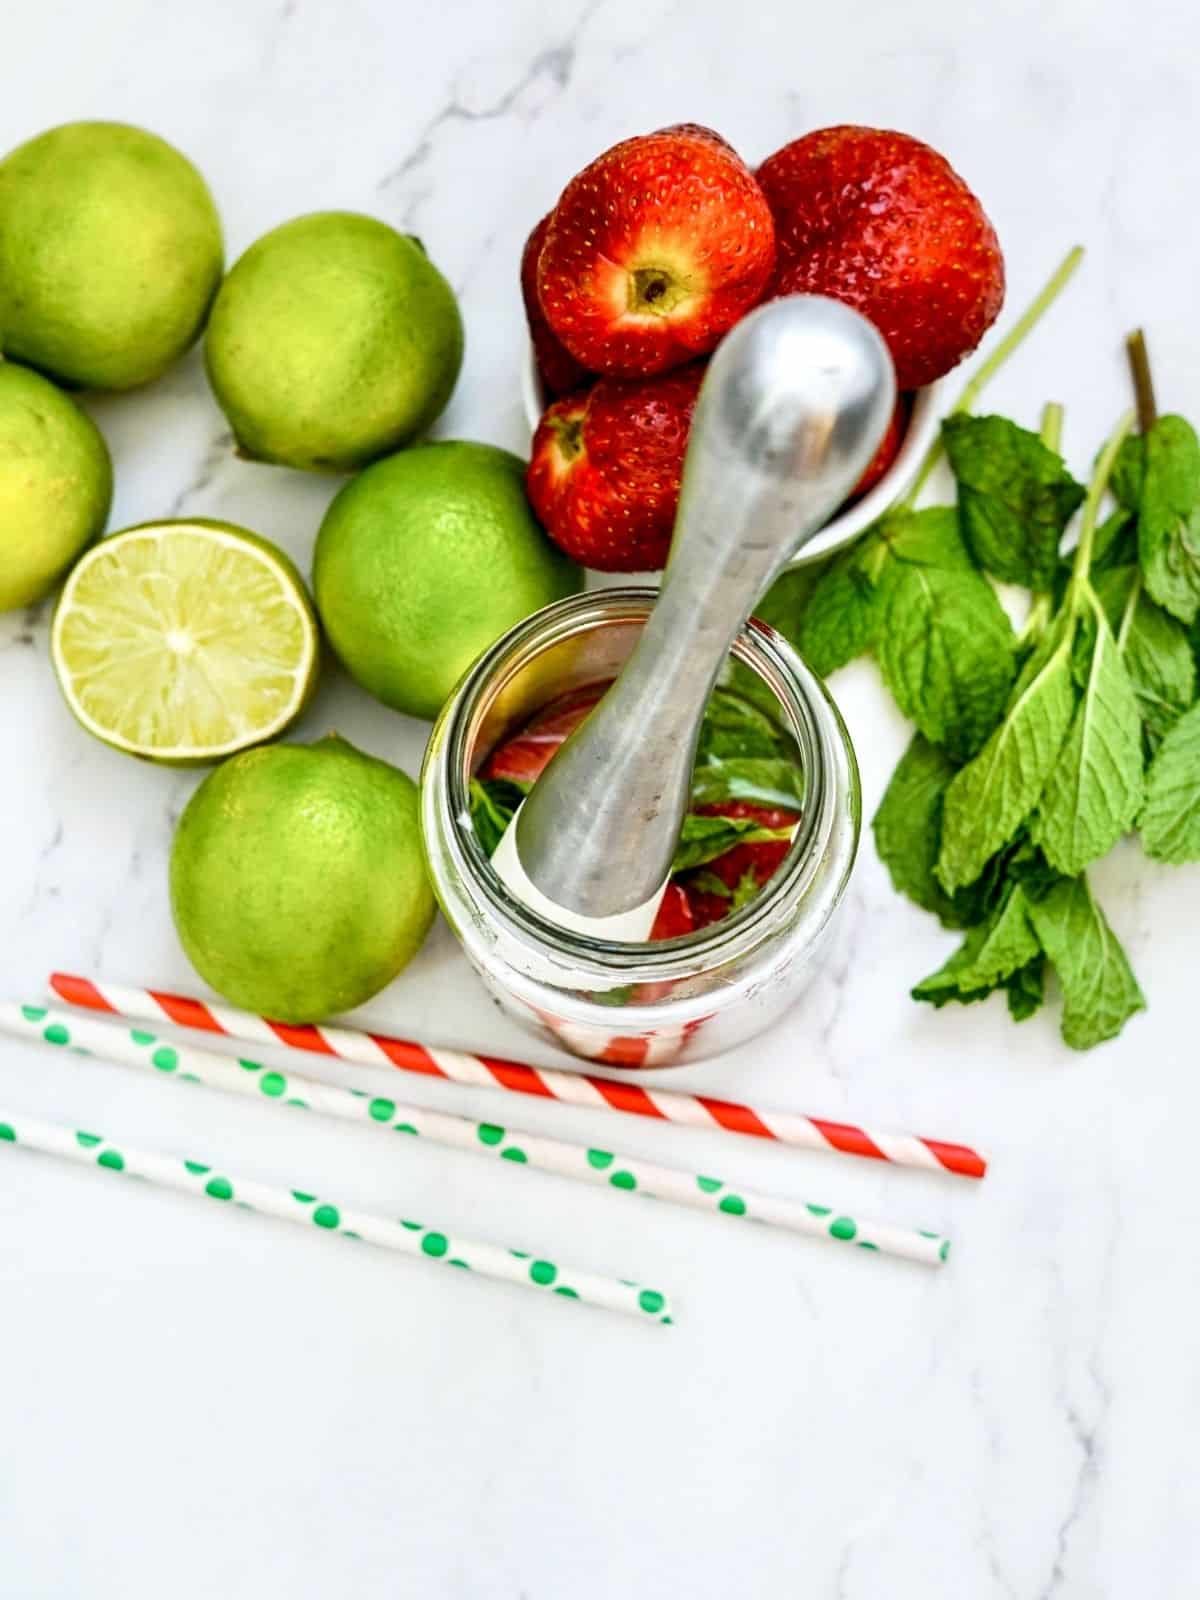 Add lime juice in glass with strawberries and mint.